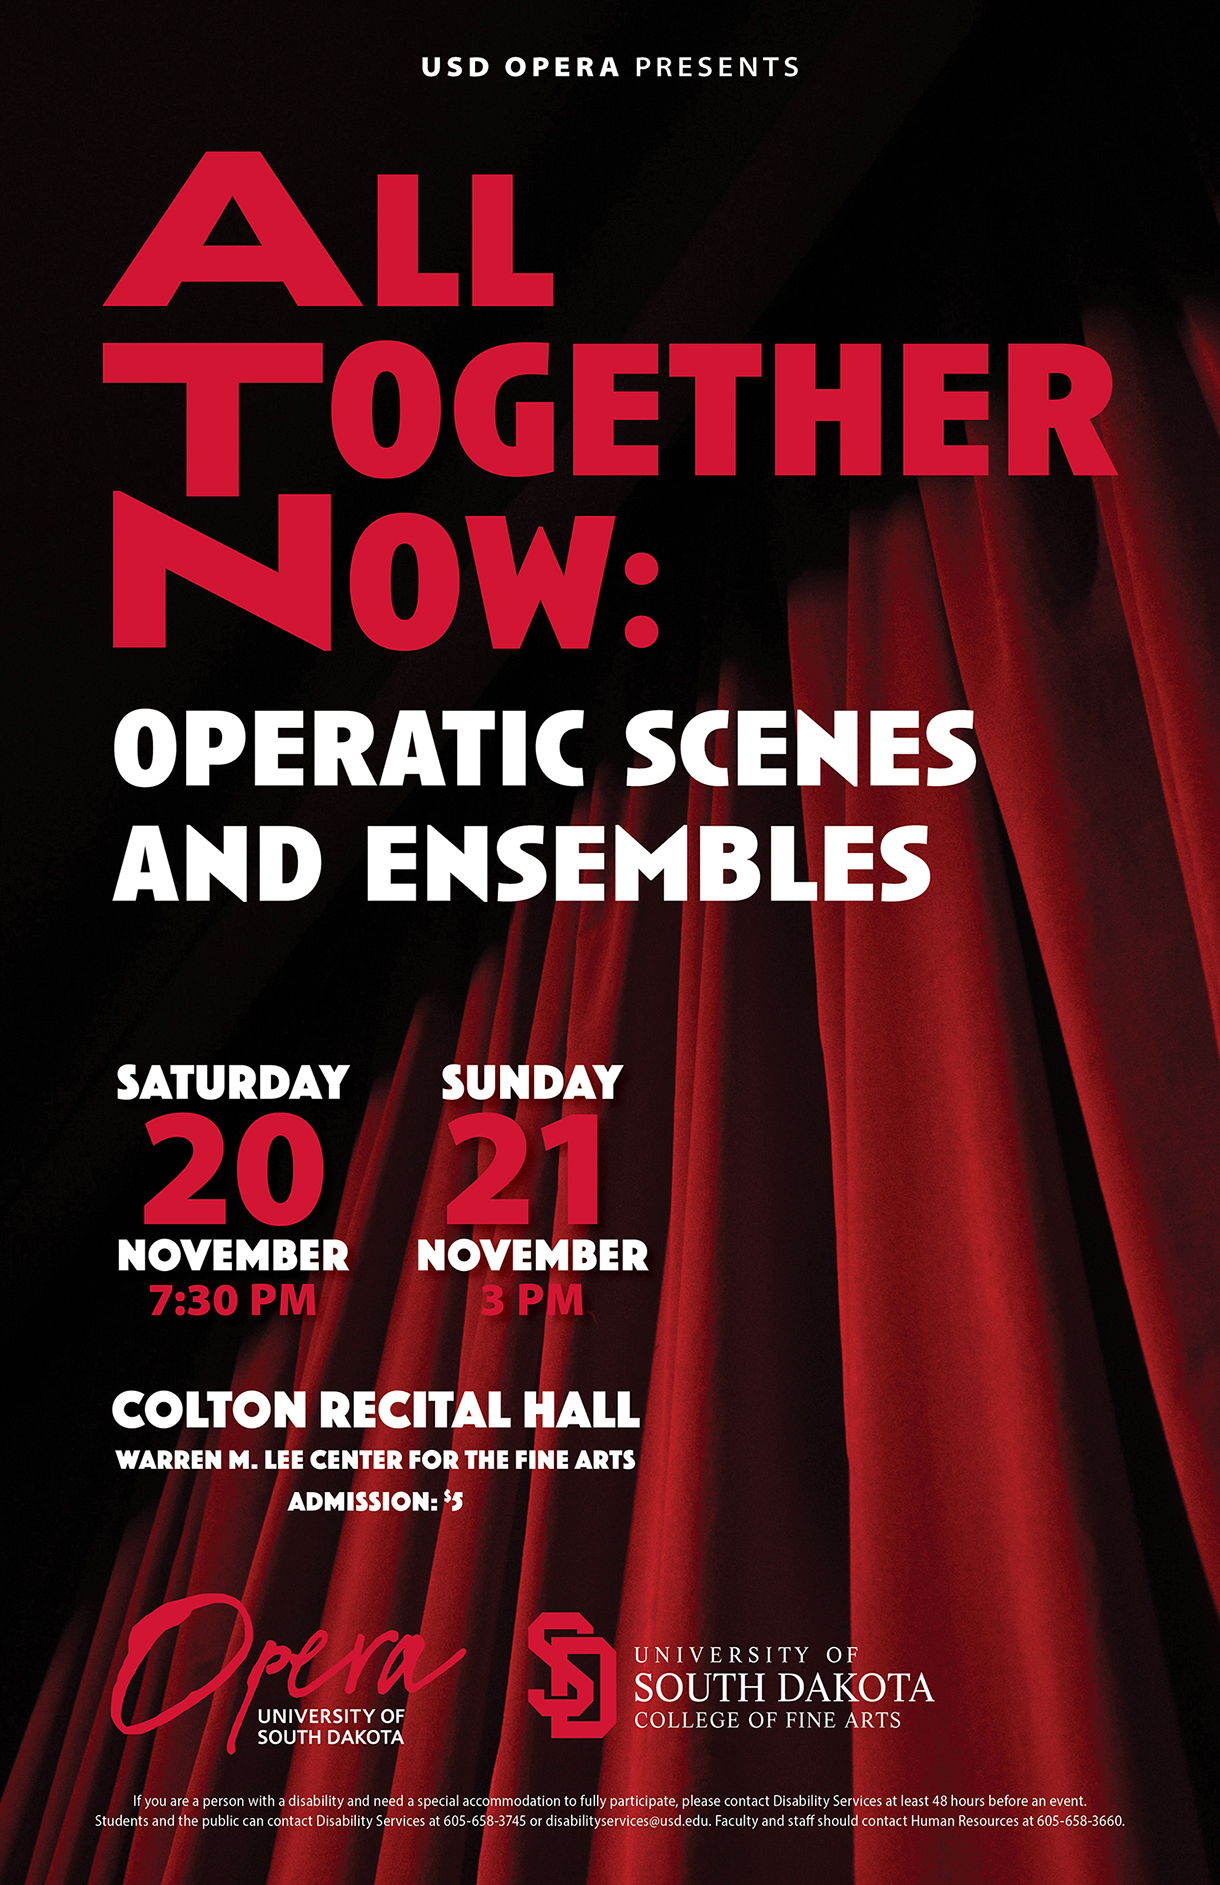 USD Opera to perform “All Together Now” this weekend